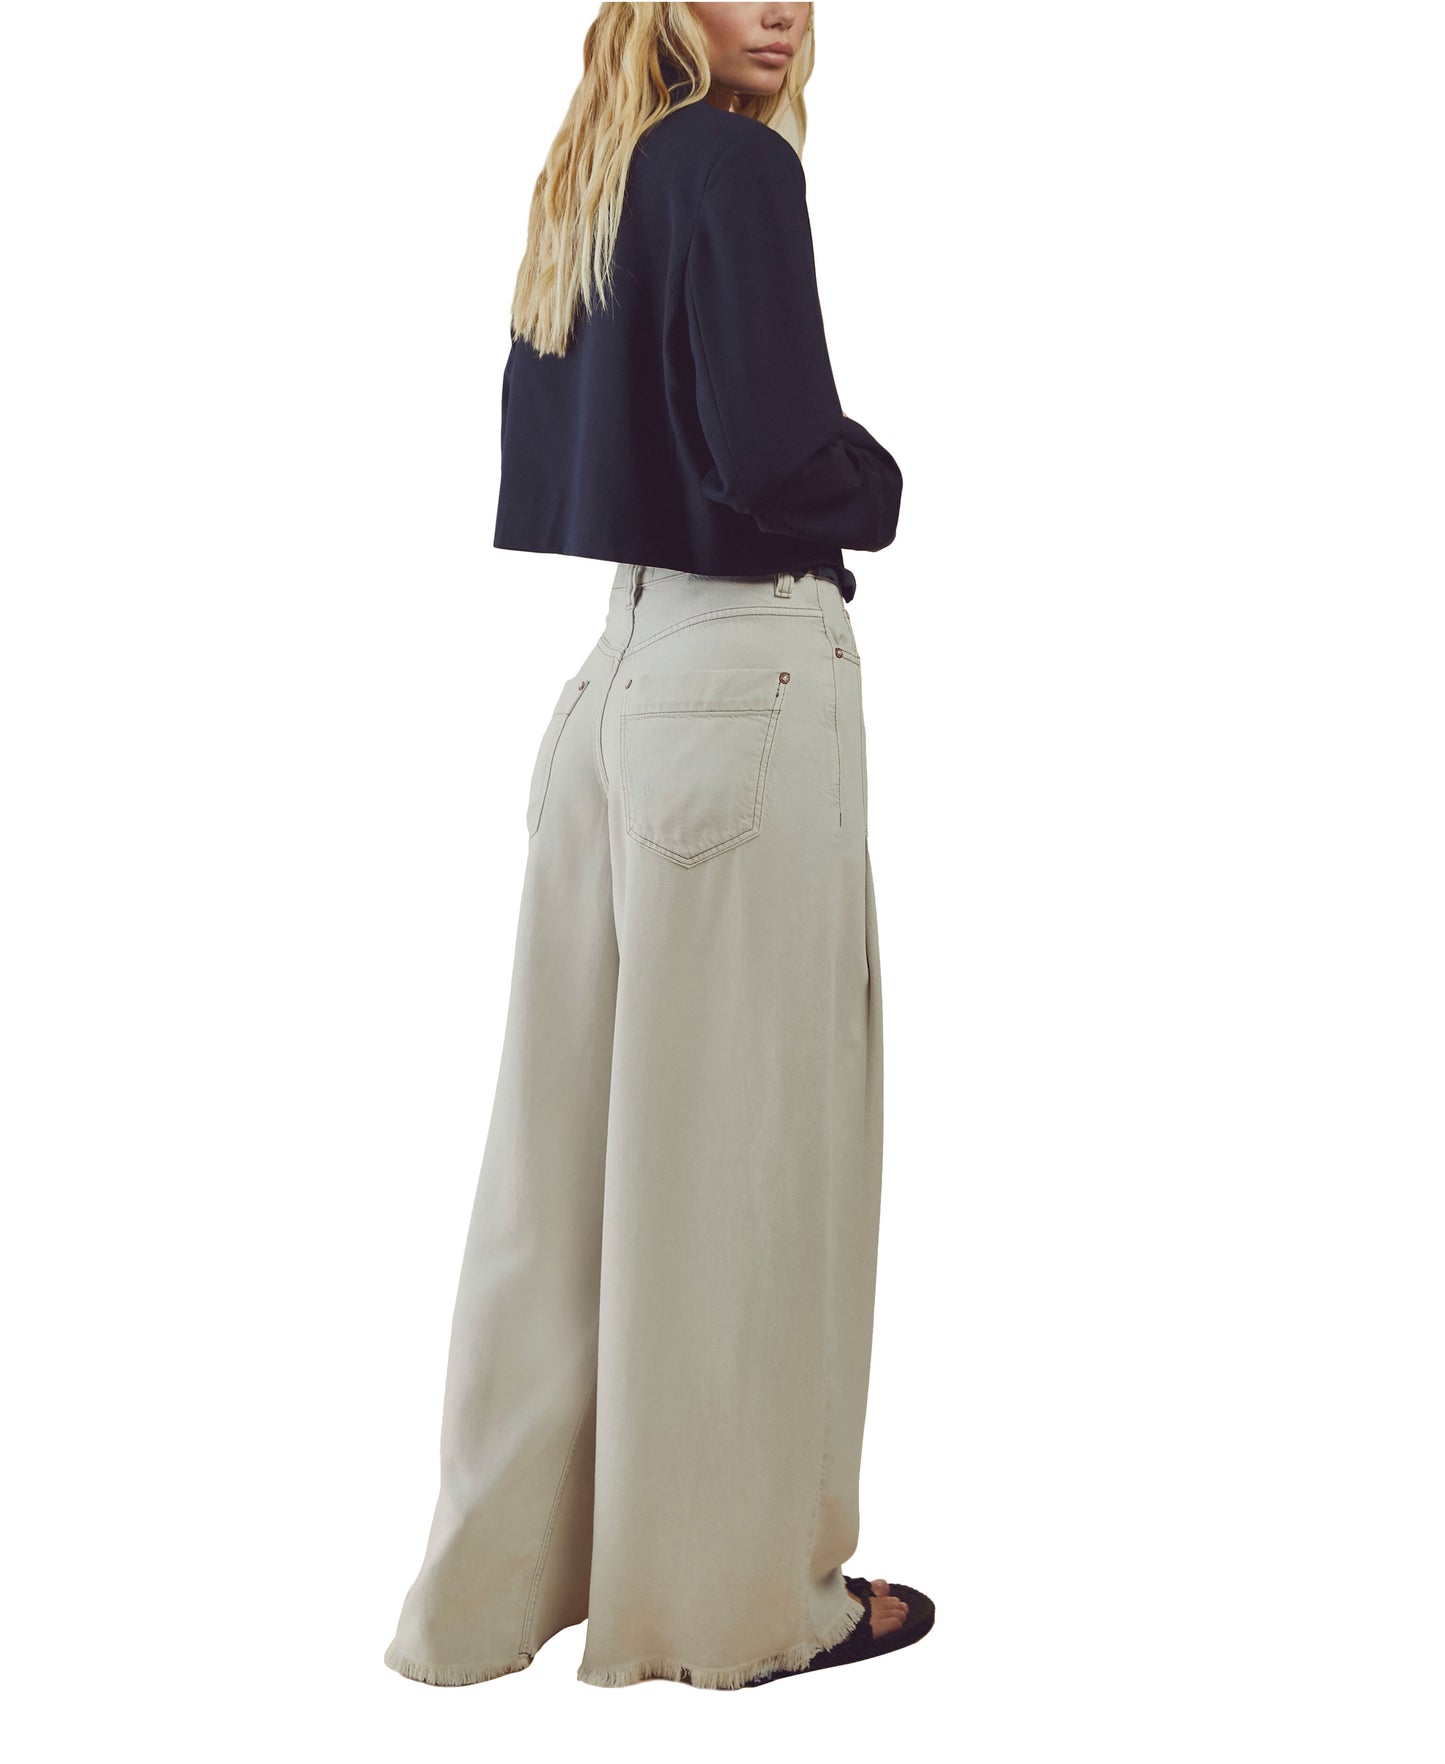 Free People Old West Slouchy Pant